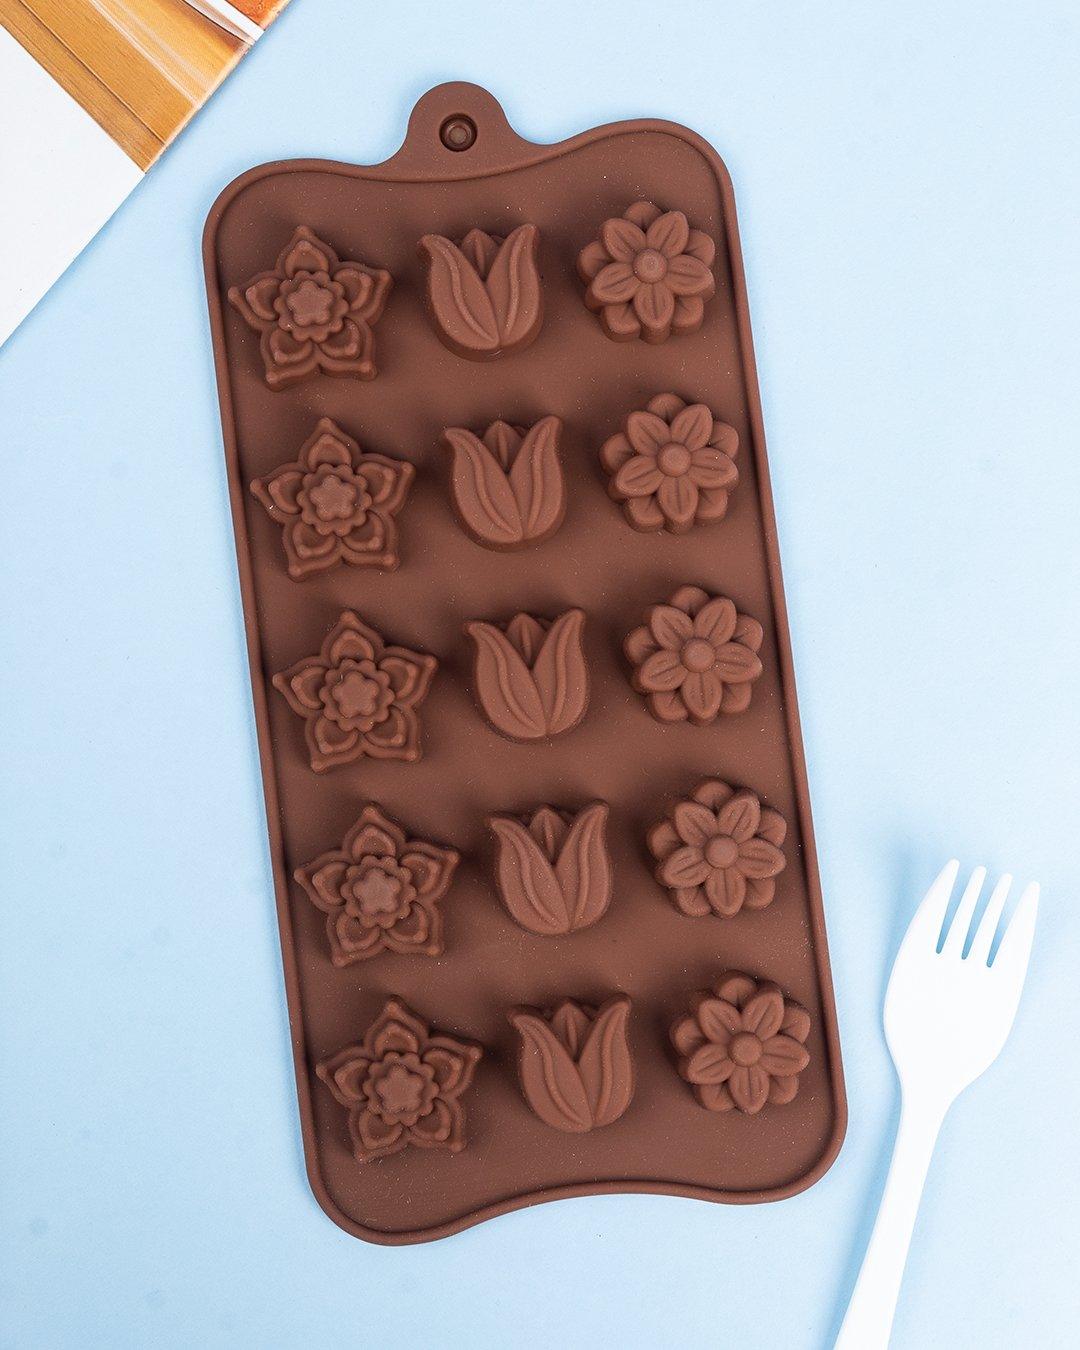 Oytra chocolate mould 3 different shapes in 1